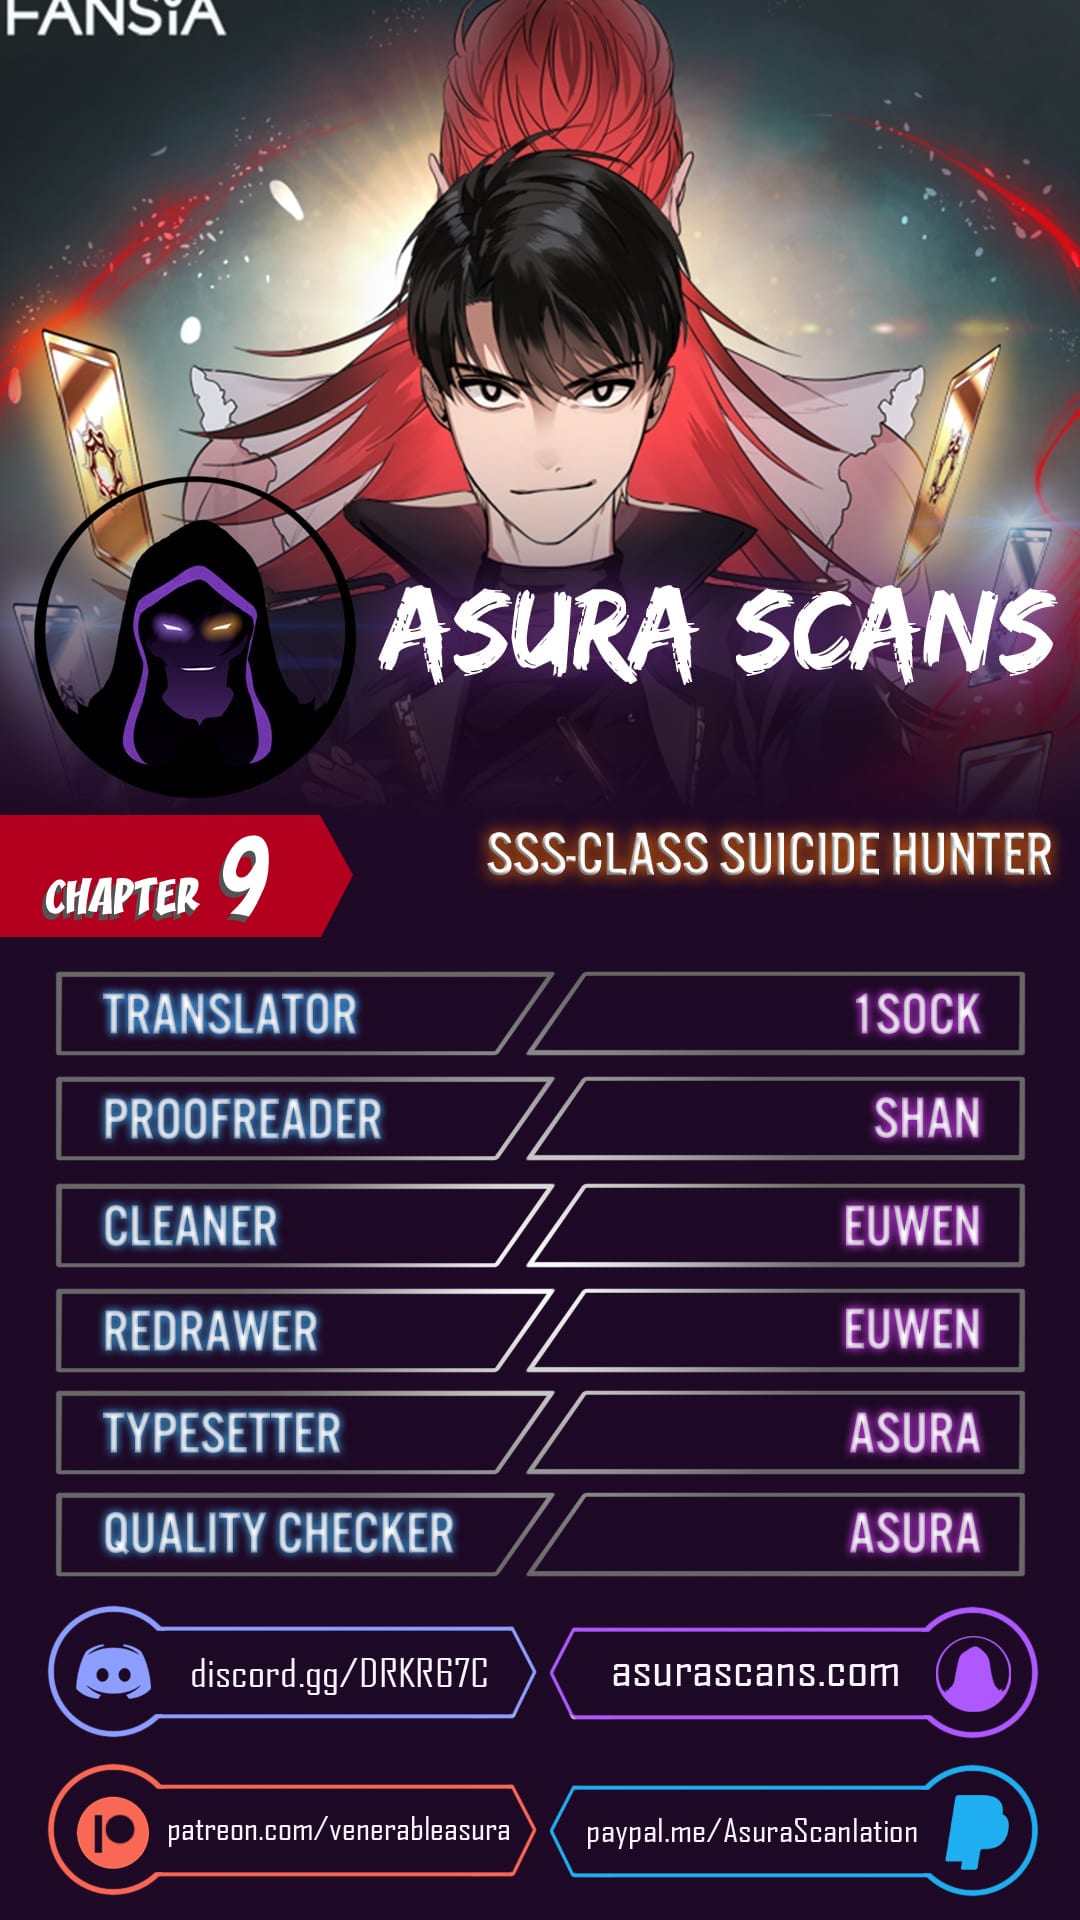 SSS-Class Suicide Hunter chapter 9